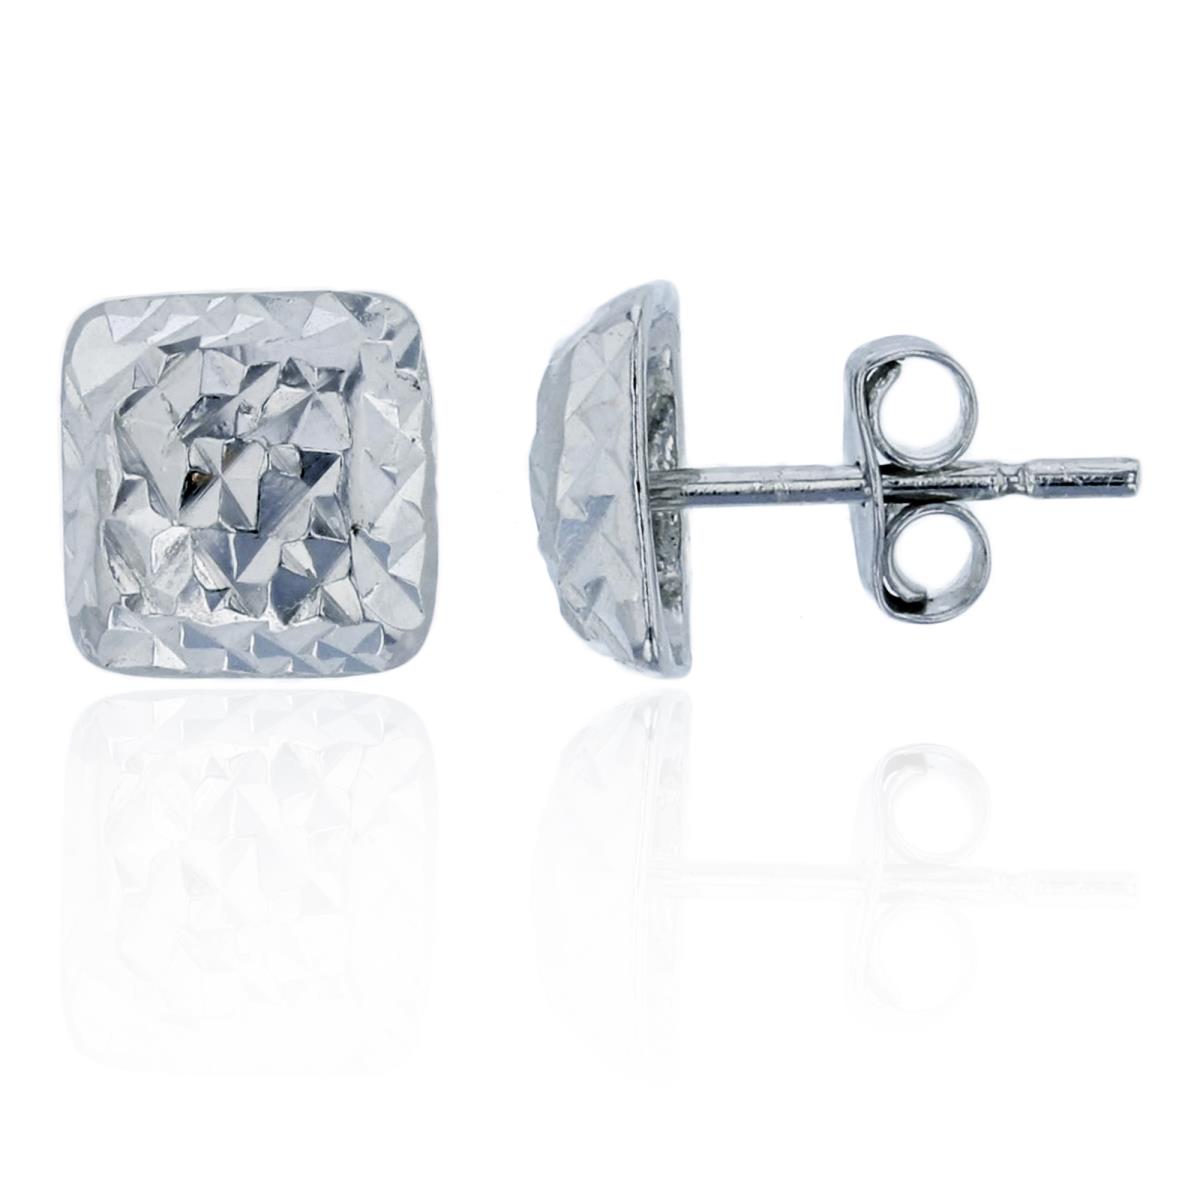 Sterling Silver Rhodium 7x7mm DC Square Stud Earring